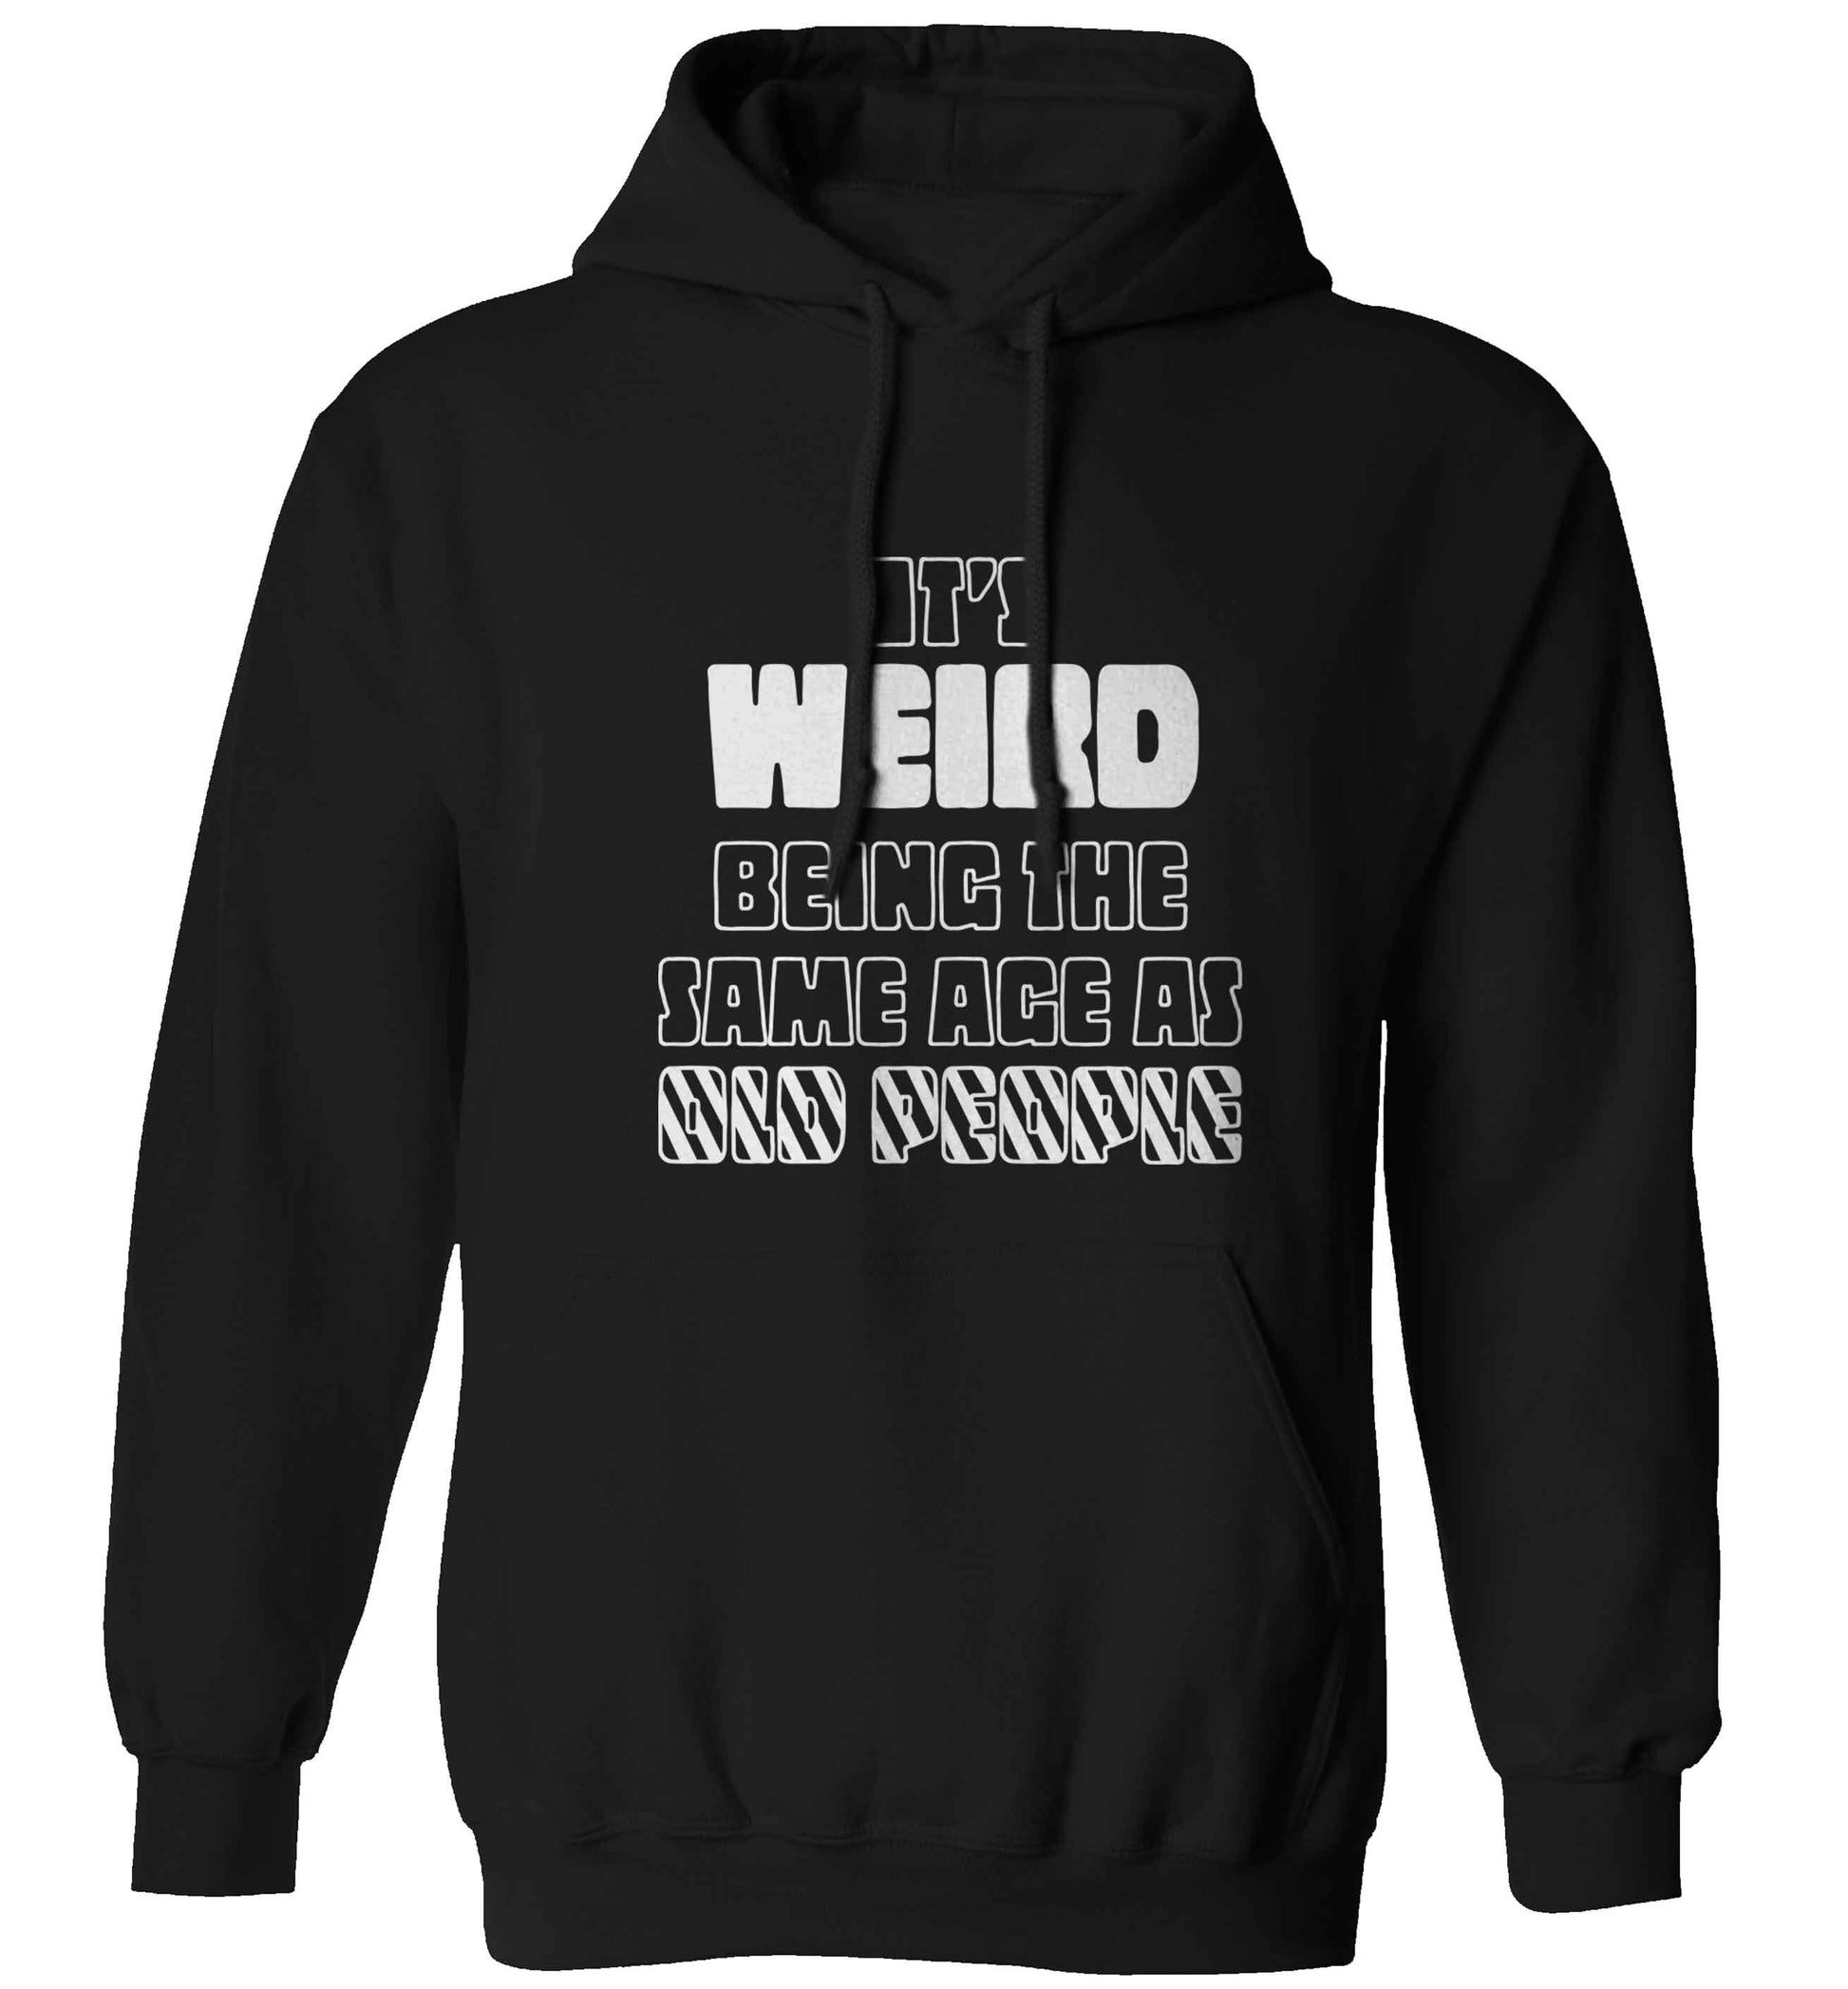 It's weird being the same age as old people adults unisex black hoodie 2XL